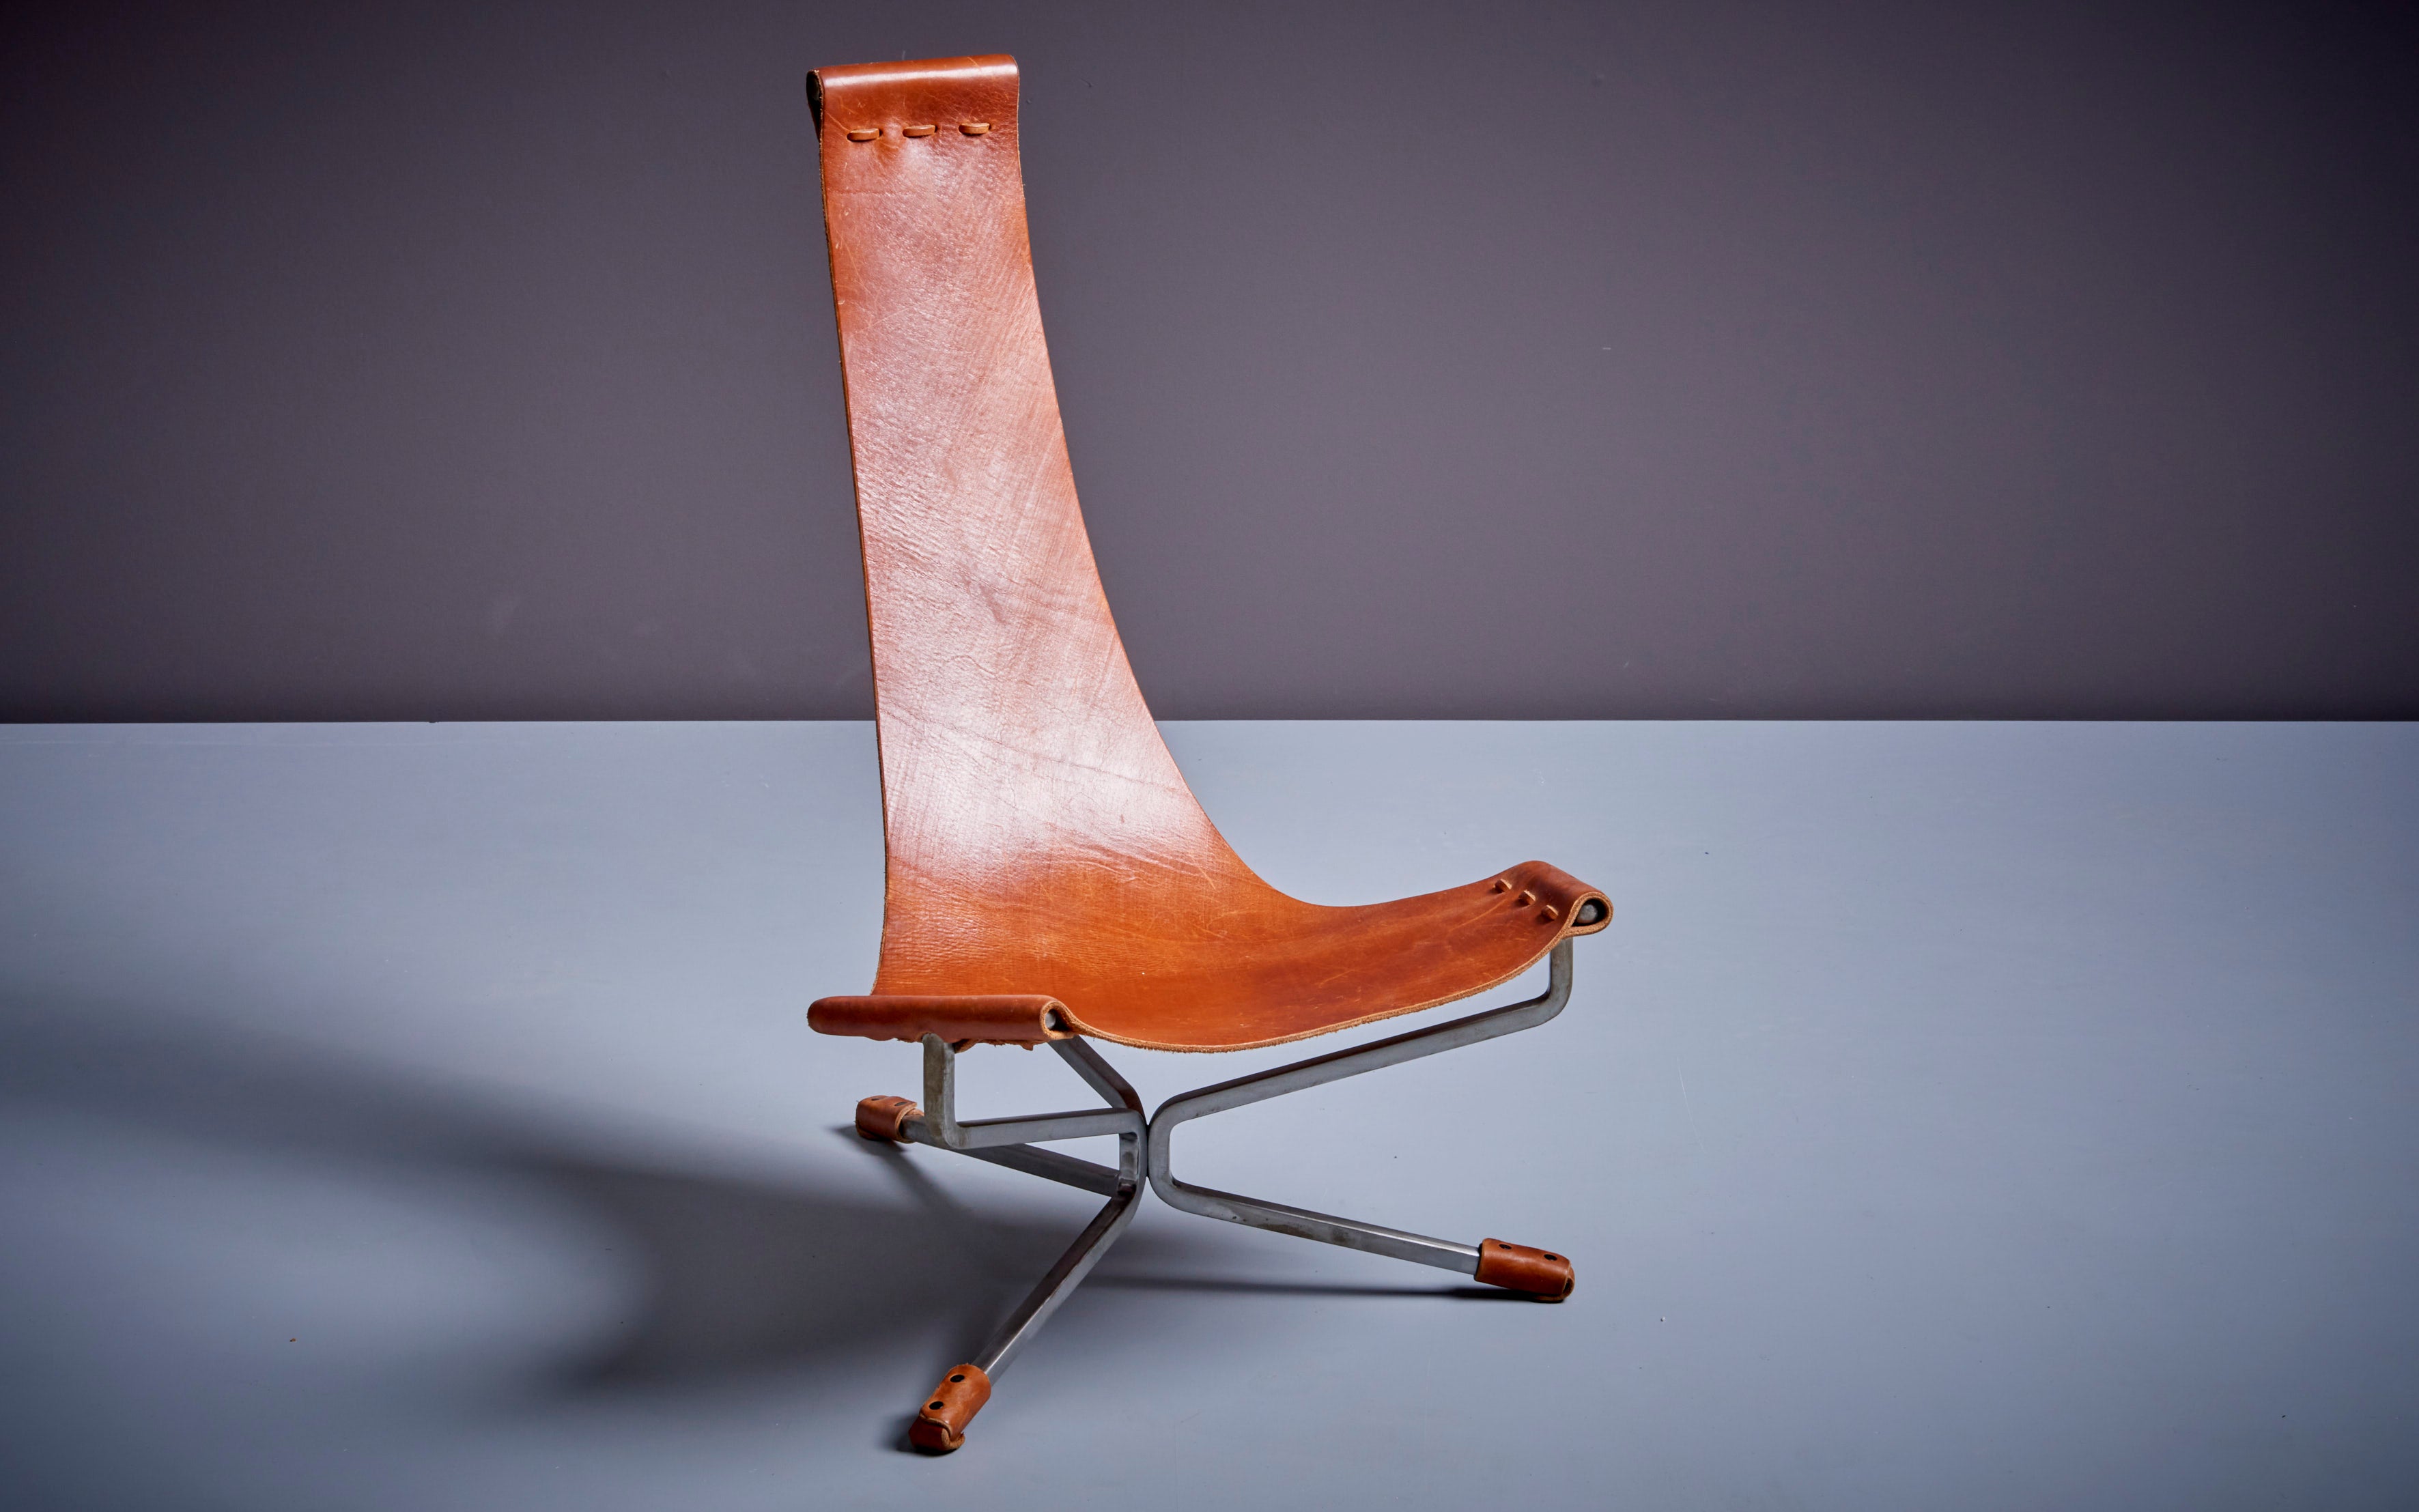 Mini Lotus chair designed by Daniel Wenger in the 1960s. Handmade during the 1970s and currently produced since 2009 by Daniel and his son Sam. Solid burnished steel frame with heavy handpicked Latigo leather sling.

Dan Wenger is an American